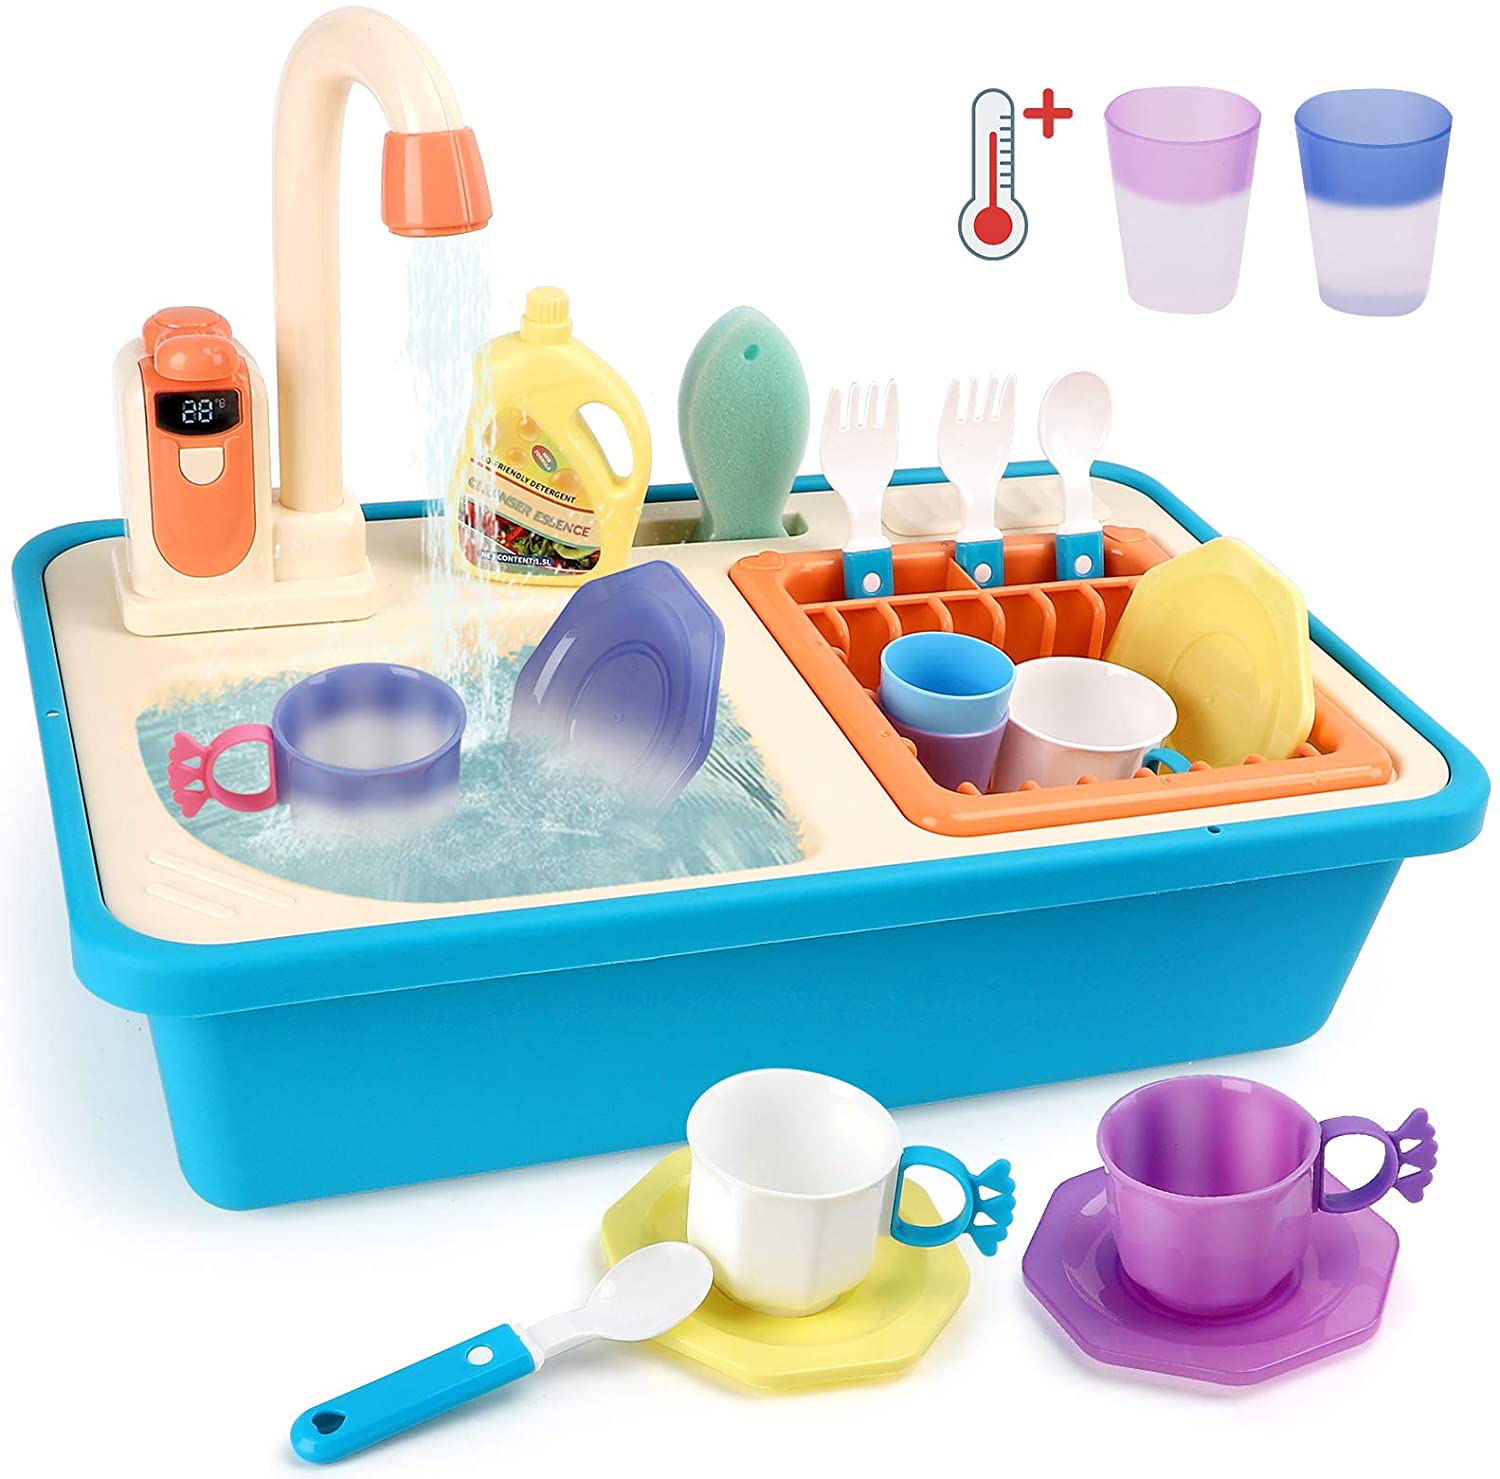 OEM/ODM China Plastic Grabber Toy - BeebeeRun Color Changing Kitchen Sink Toys, Electric Dishwasher Play Sink with Running Water,Kitchenwear Toys,Automatic Water Cycle System Play House Pretend Ro...